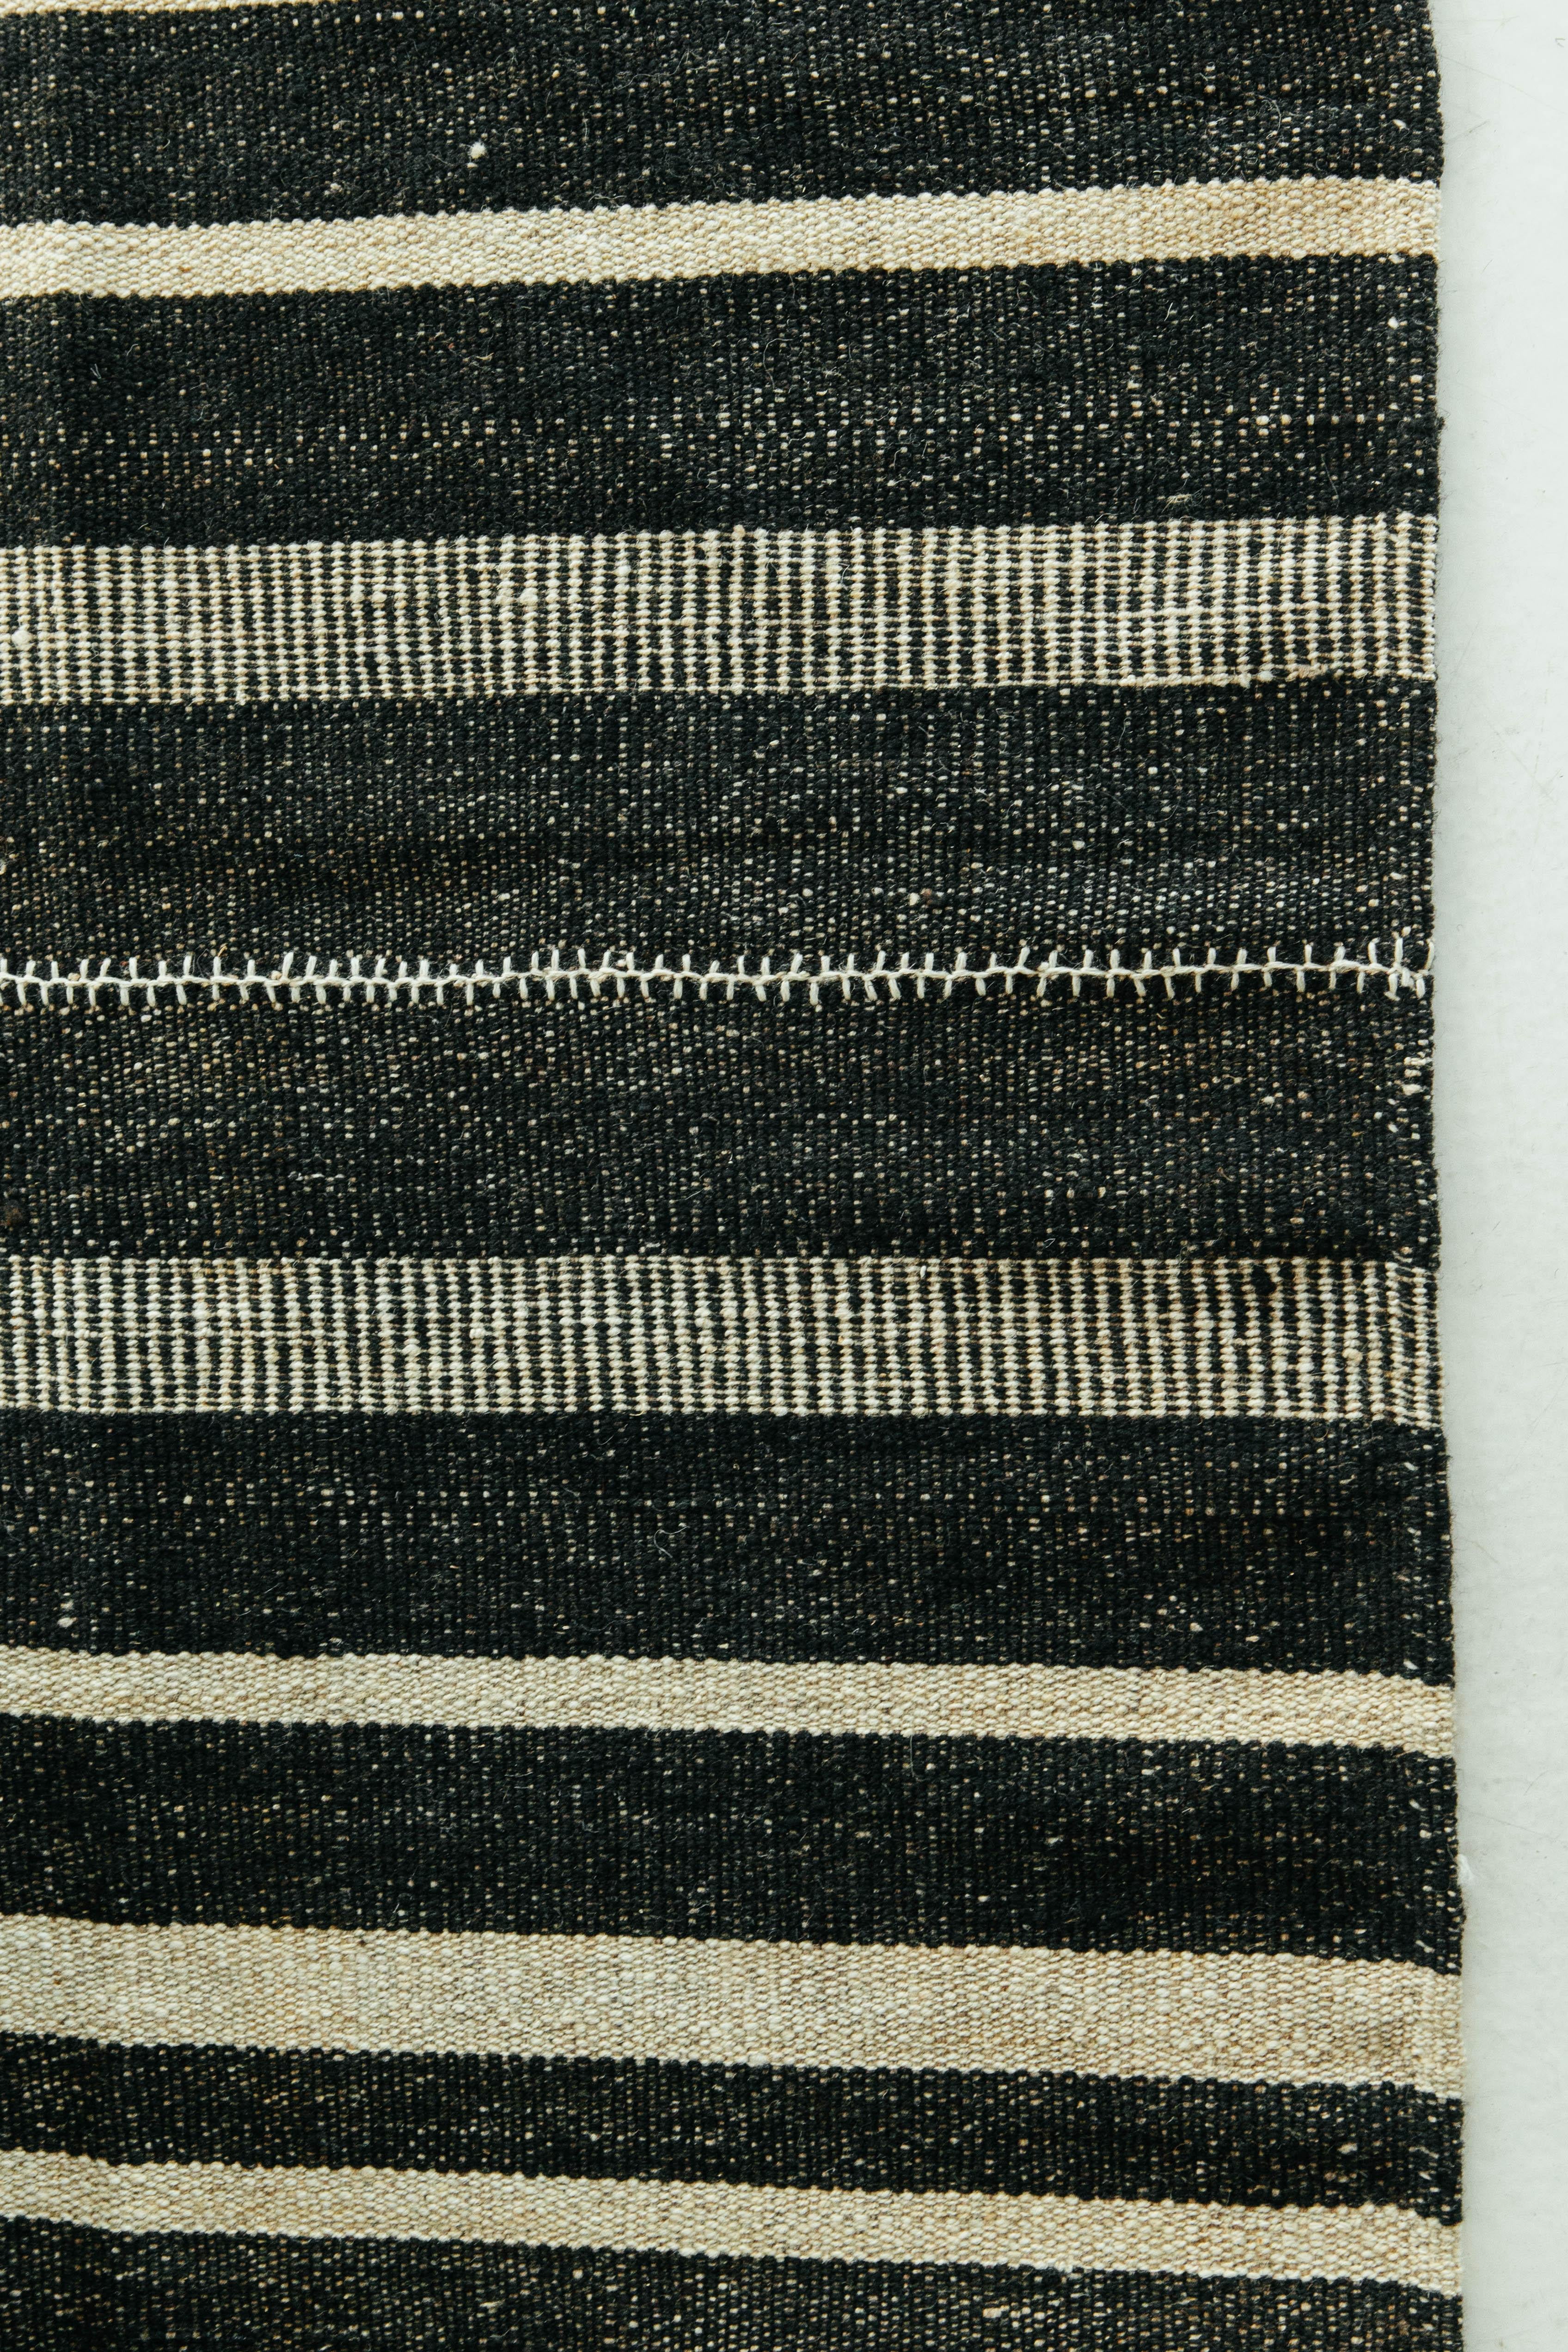 This Persian Jejim Kilim is a banded flat-weave with alternating black and ivory stripes in varying sizes and styles. Persian flat weaves are made up of some of the best wool and weaved exceptionally to create interesting textures. This piece will